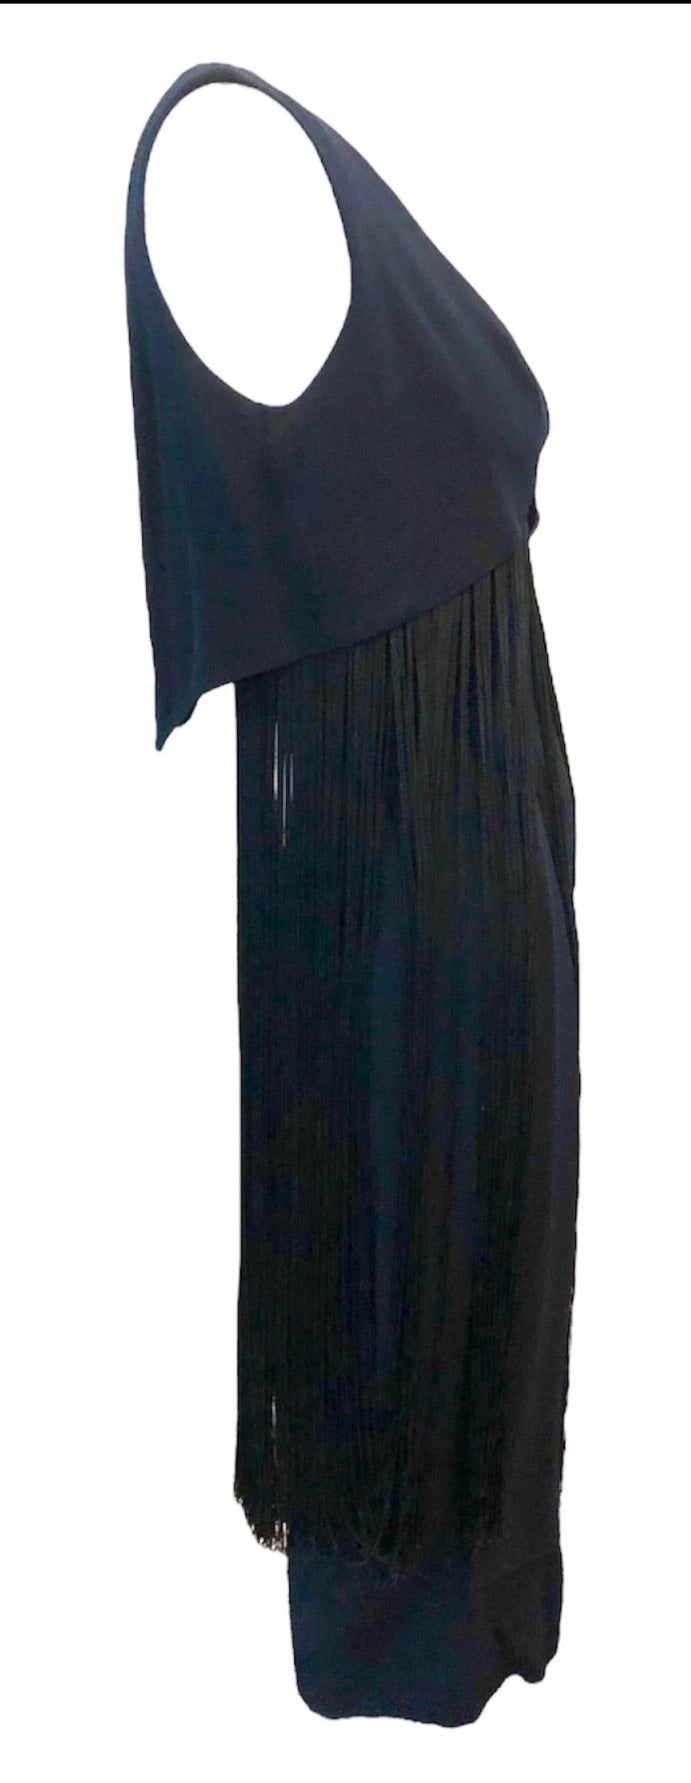 Syano 60s Black Cocktail Dress with Long Fringe Skirt SIDE 2 of 4